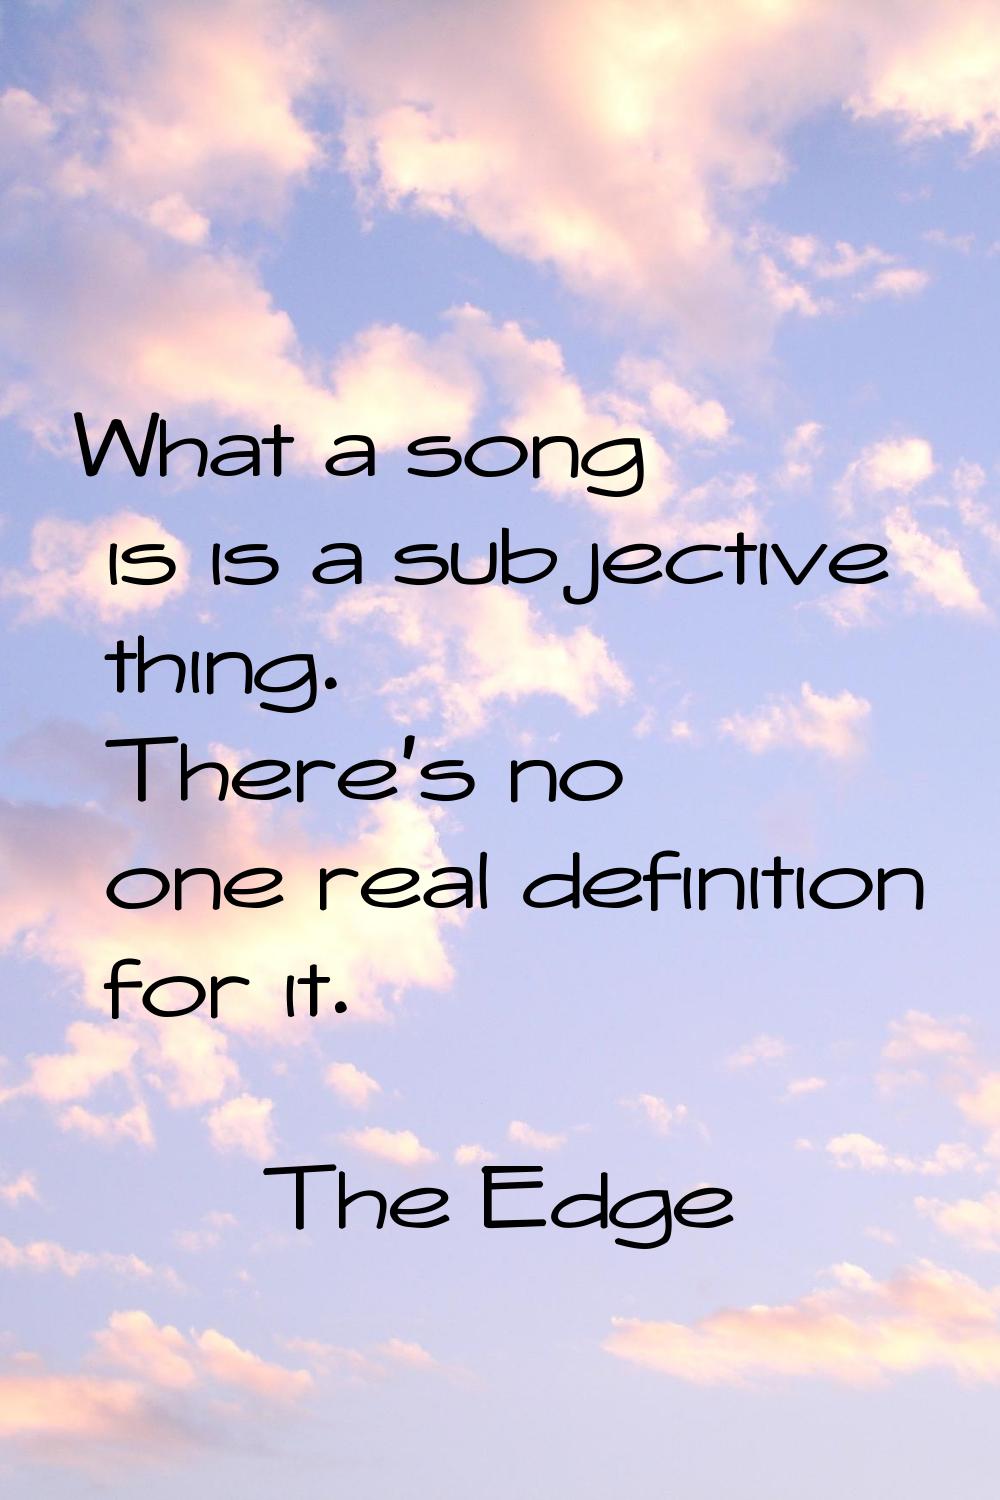 What a song is is a subjective thing. There's no one real definition for it.